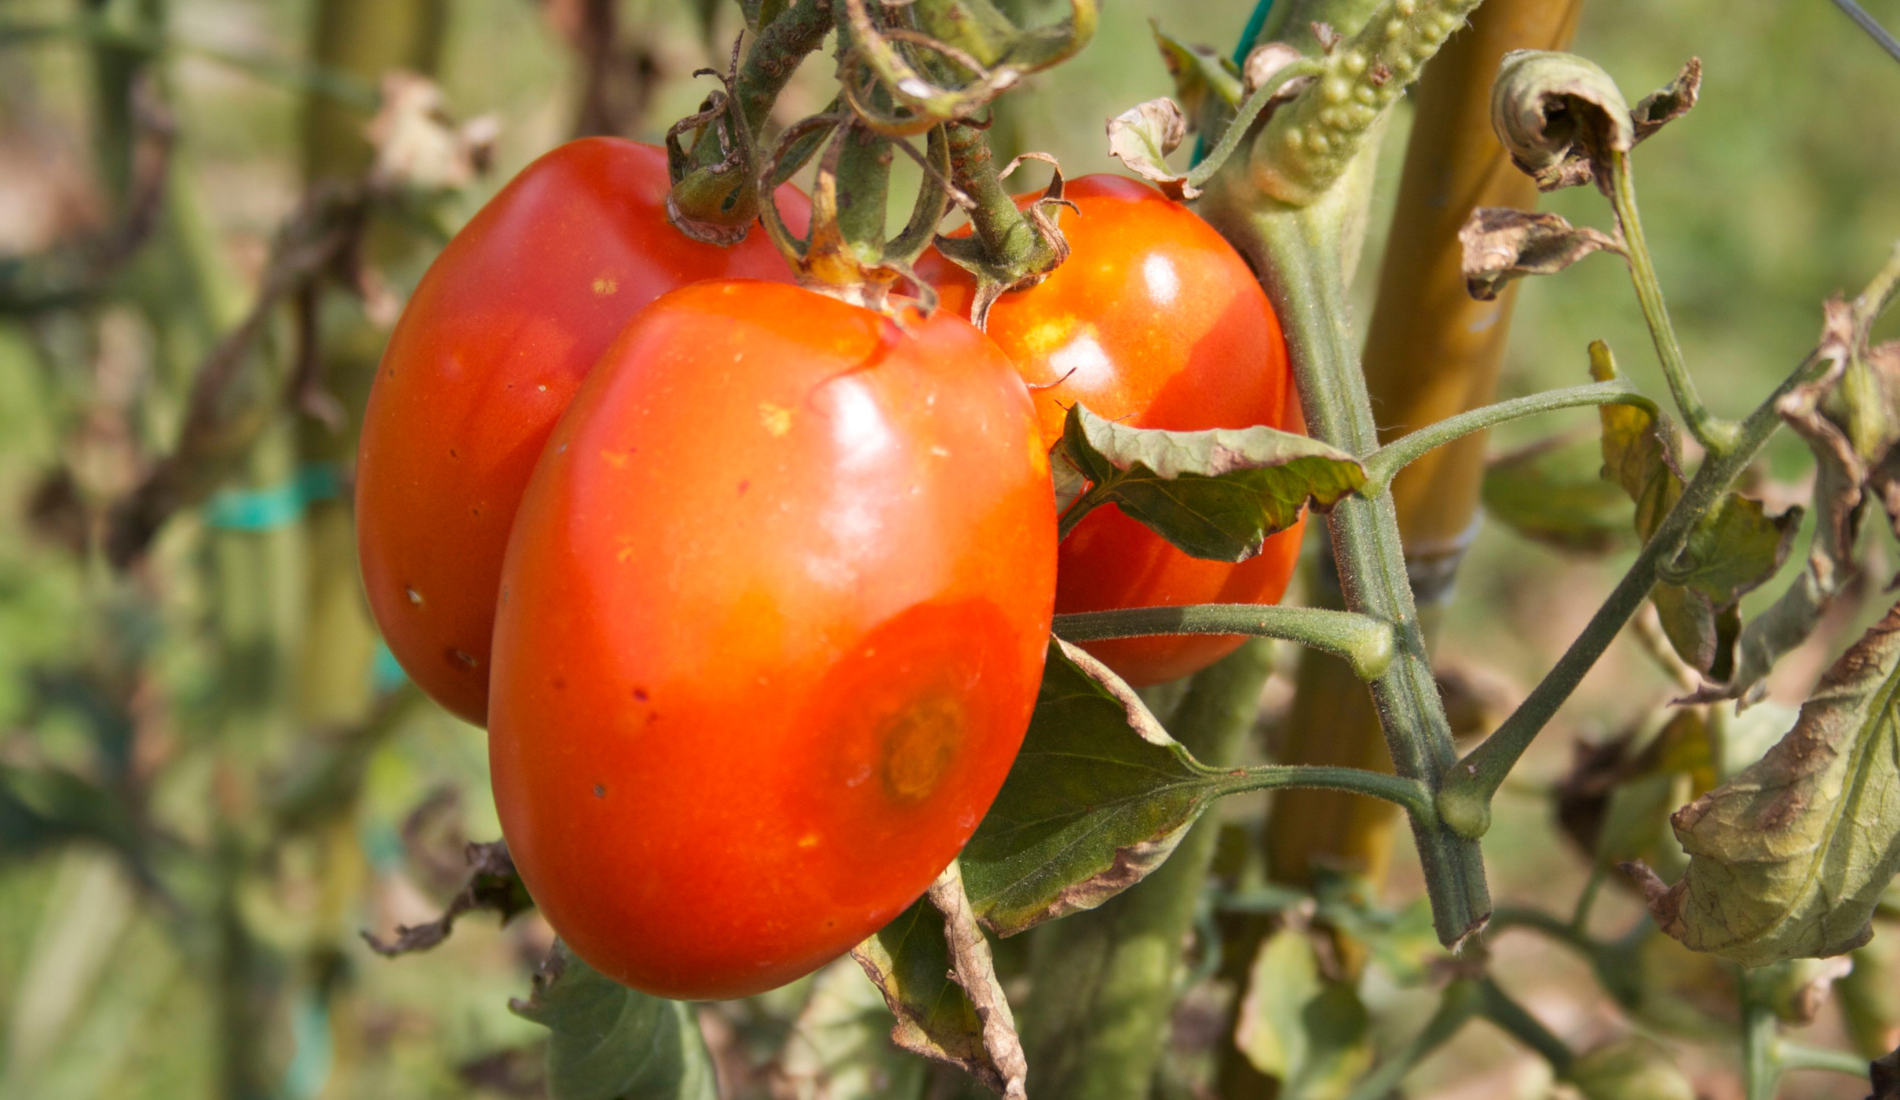 Tomatoes on plant with disease.